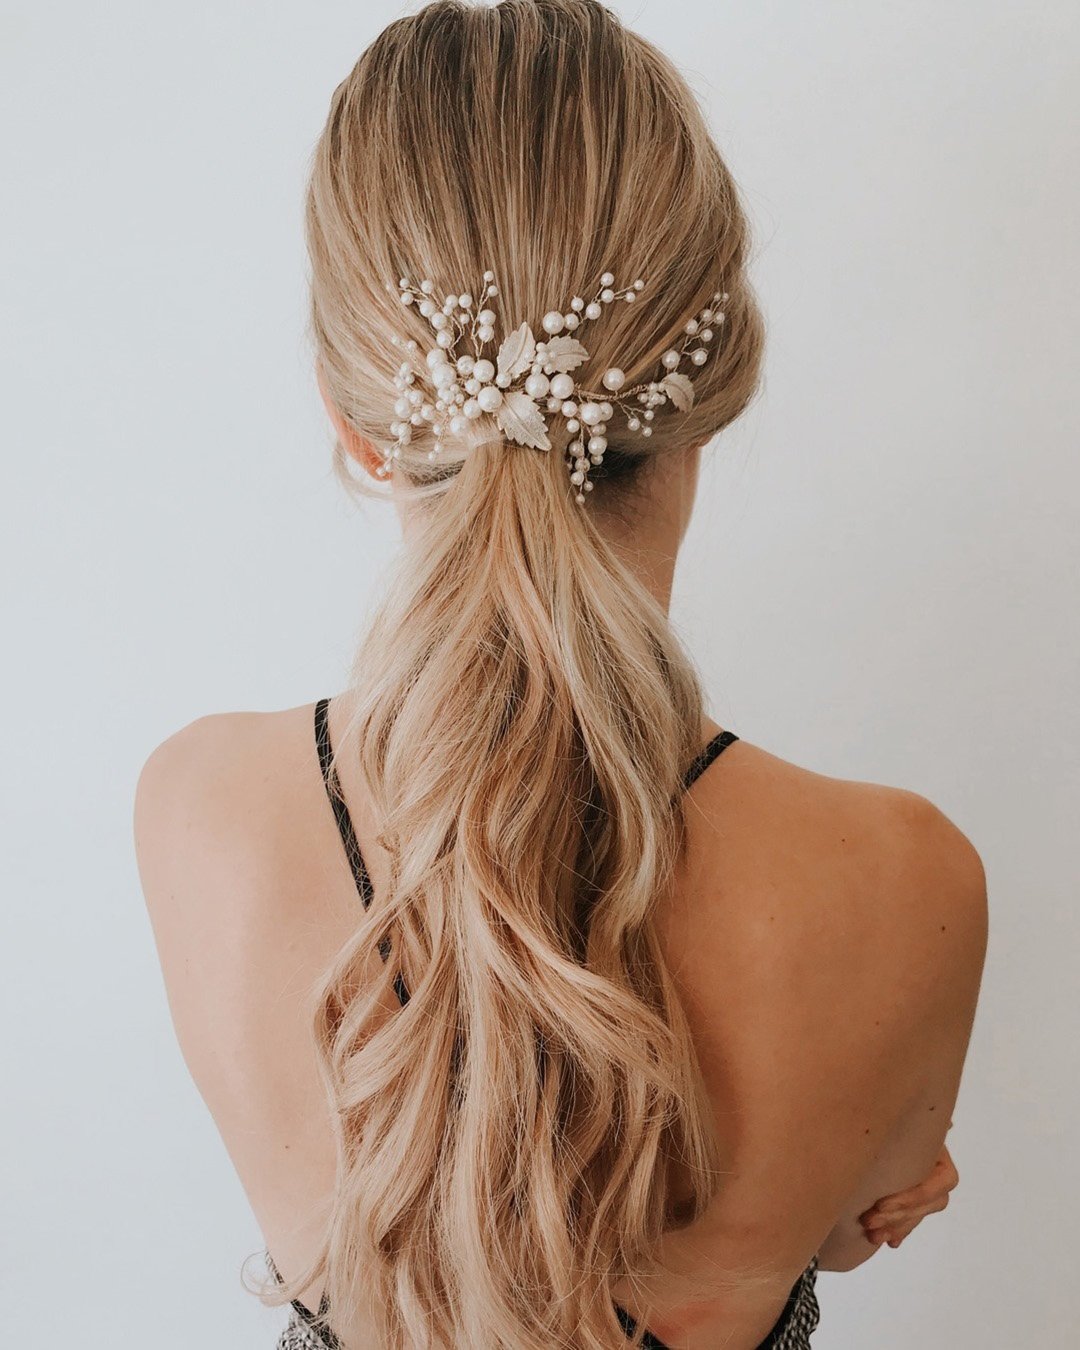 pony tail hairstyles ideas for wedding long hair simple untamedpetals